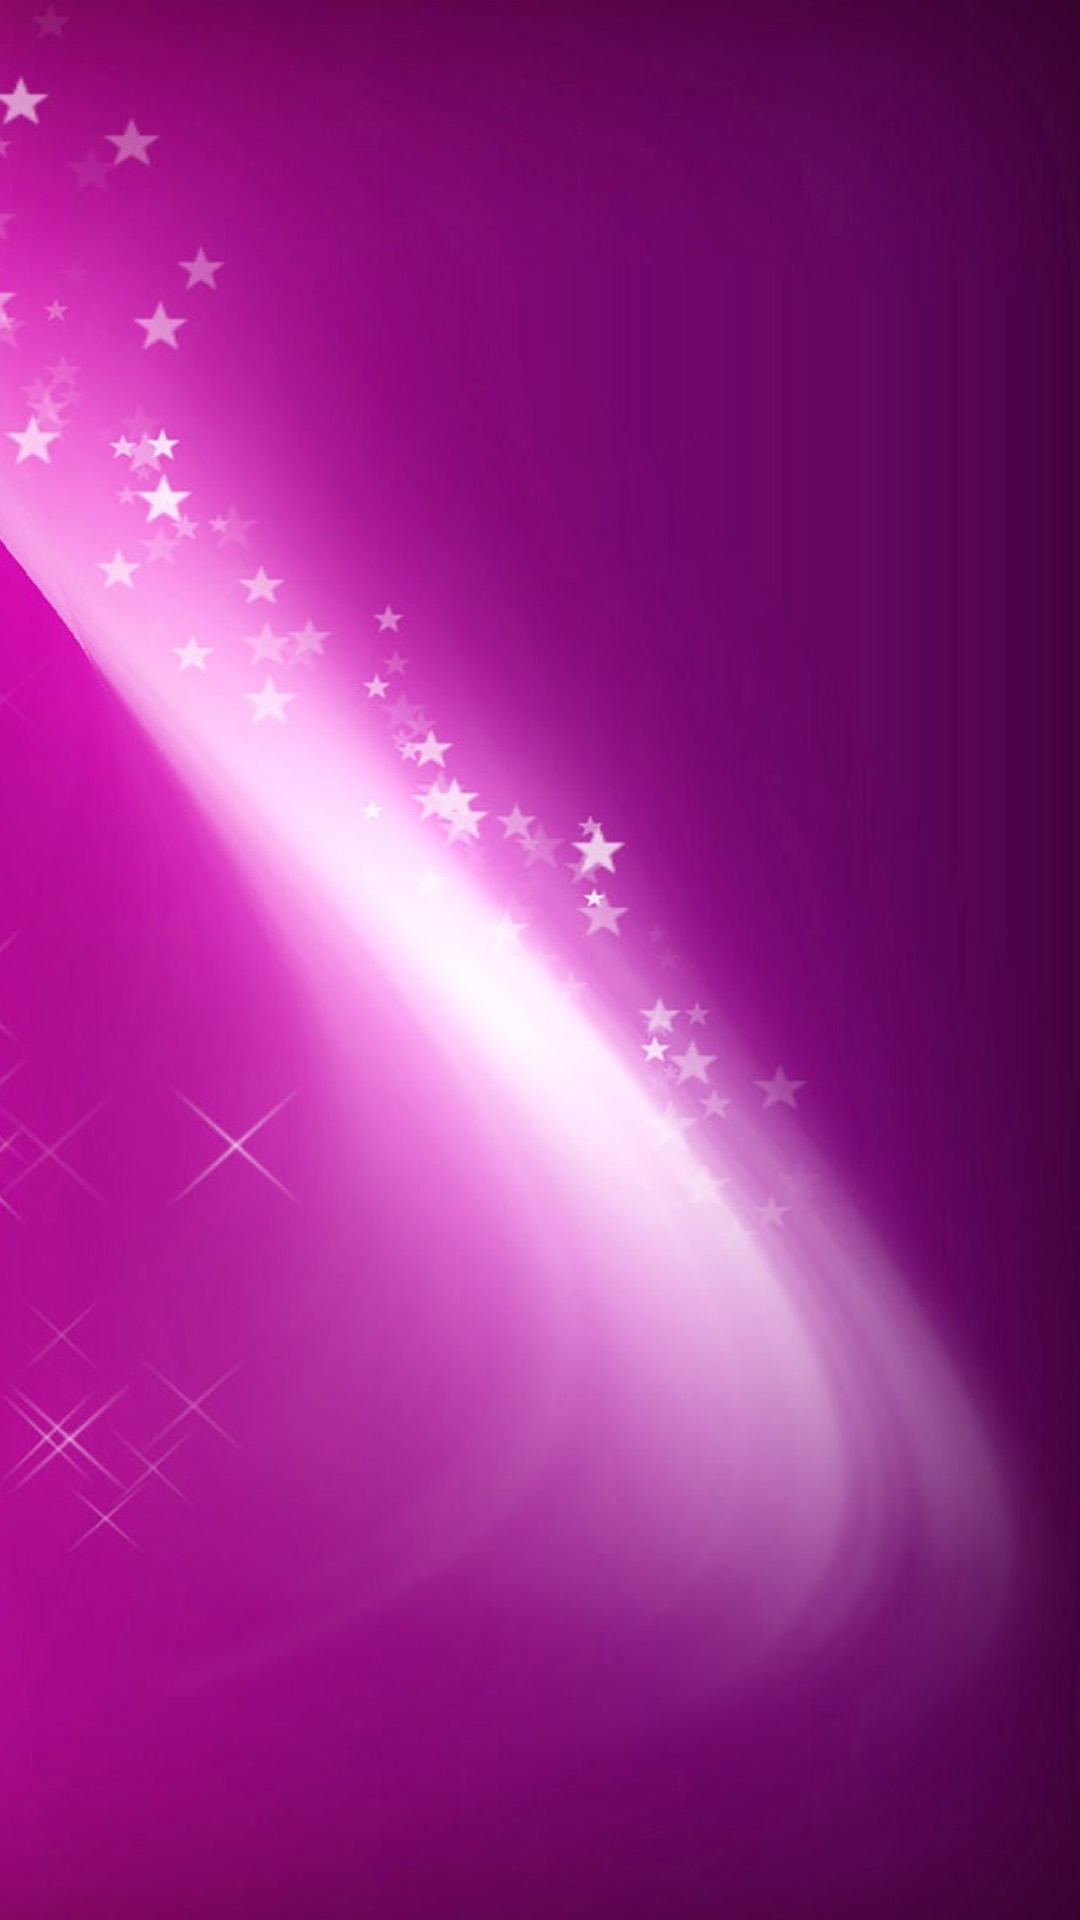 Free download Pink glow abstract 2 Galaxy S4 Wallpaper [1080x1920] for your Desktop, Mobile & Tablet. Explore Pink Galaxy Wallpaper. Purple Galaxy Wallpaper, Best Galaxy Wallpaper, Galaxy Wallpaper HD Desktop